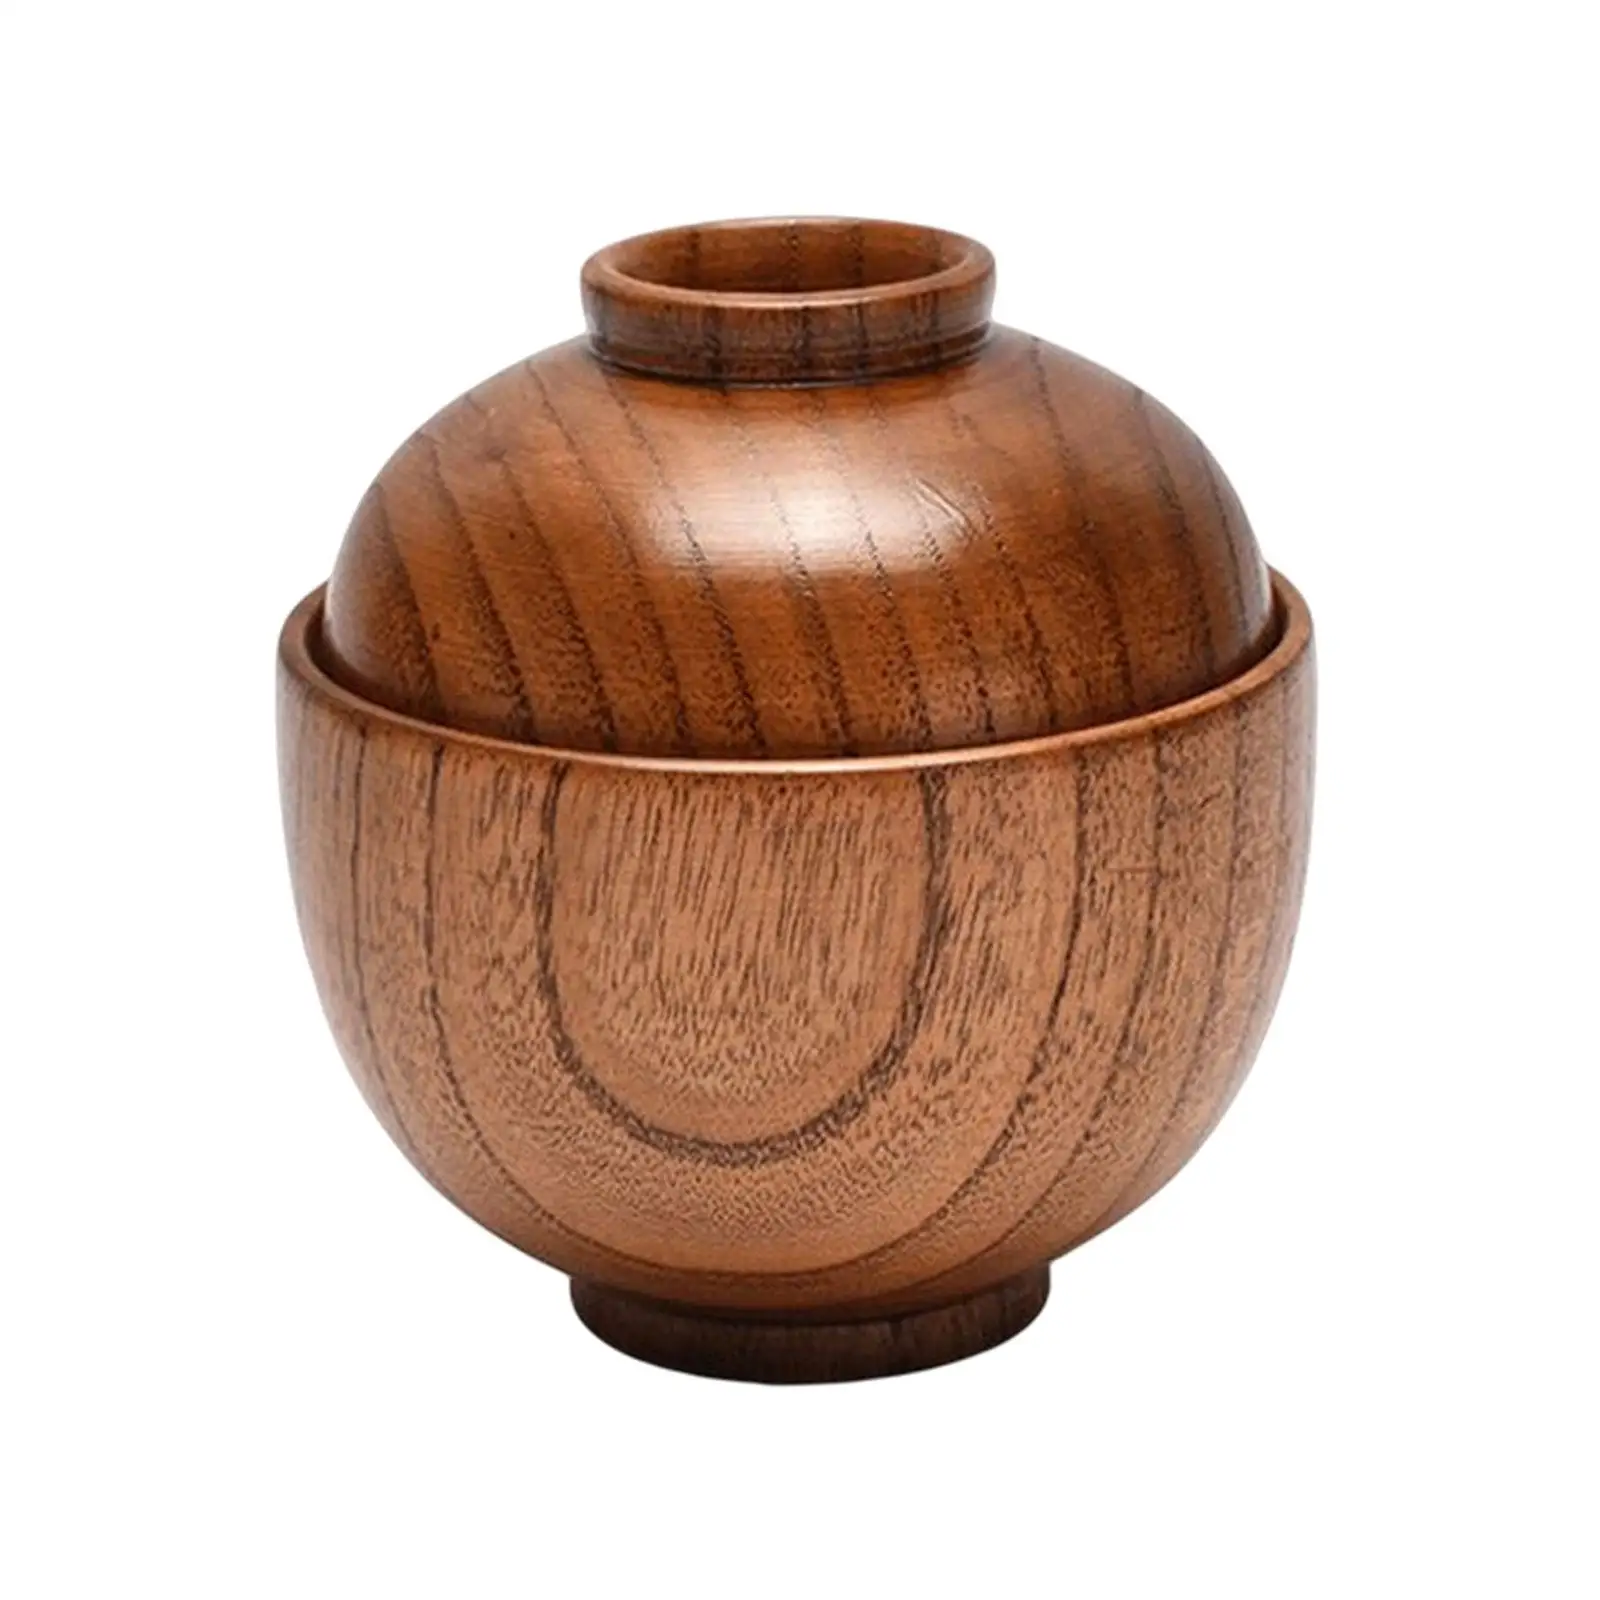 Wooden Bowl with Lid Dinnerware Mixing Fruit Bowl Kitchen Container Kids Bowl Tableware Food Utensil Small Wooden Bowls